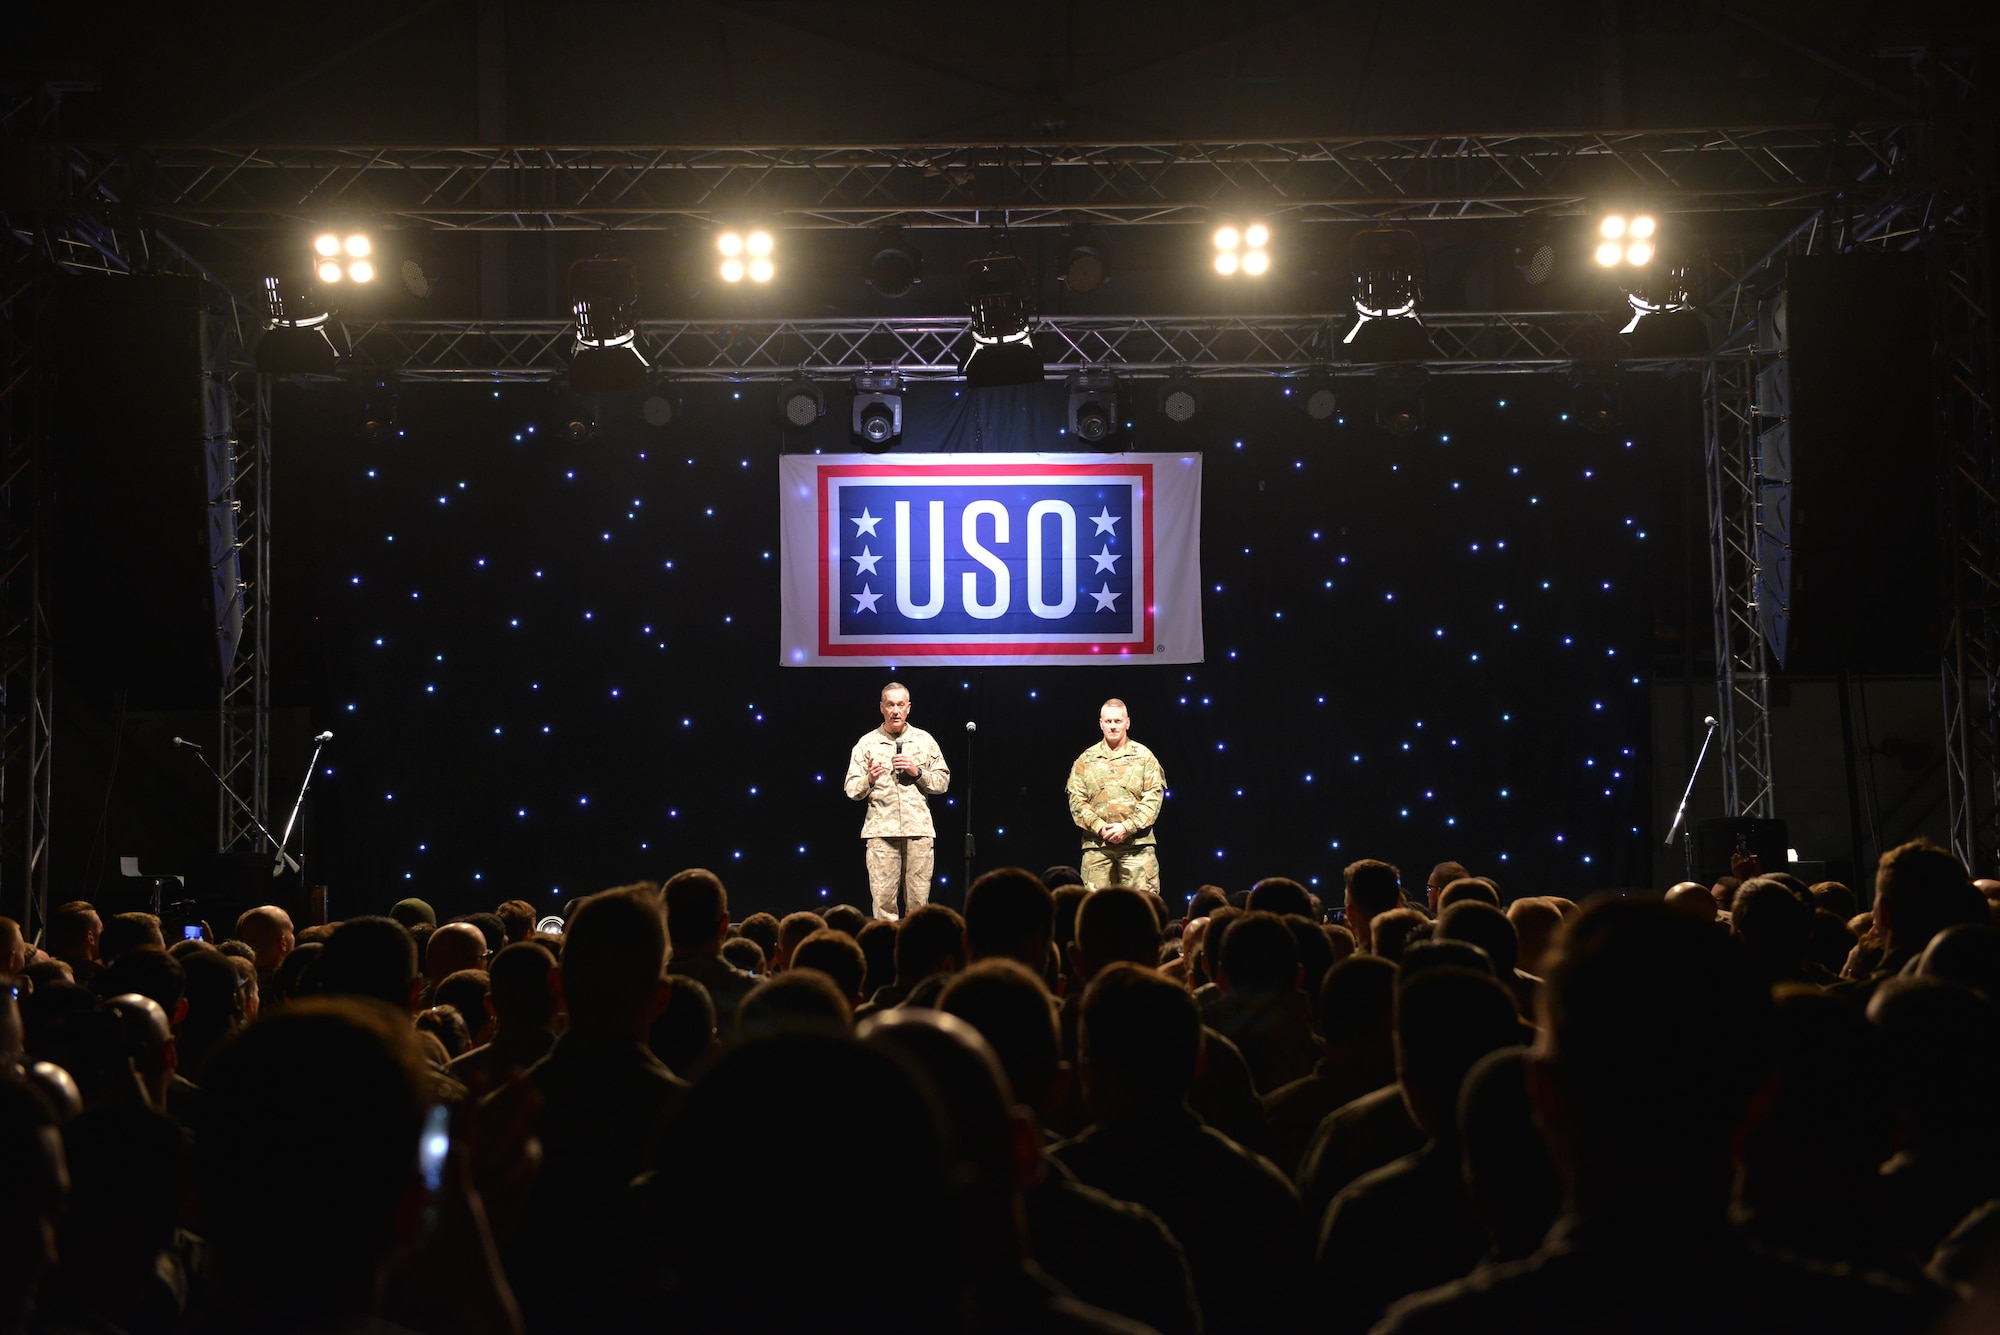 U.S. Marine Corps Gen. Joseph F. Dunford, Jr., chairman of the Joint Chiefs of Staff, and U.S. Army Command Sgt. Maj. John W. Troxell, senior enlisted advisor to the chairman of the Joint Chiefs of Staff, address service members during the 2016 USO Holiday Visit Dec. 5, 2016, at Incirlik Air Base, Turkey. Dunford and Troxell visited Incirlik as a part of the 2016 USO Holiday Visit, a tradition that started in 2003. (U.S. Air Force photo by Senior Airman John Nieves Camacho)